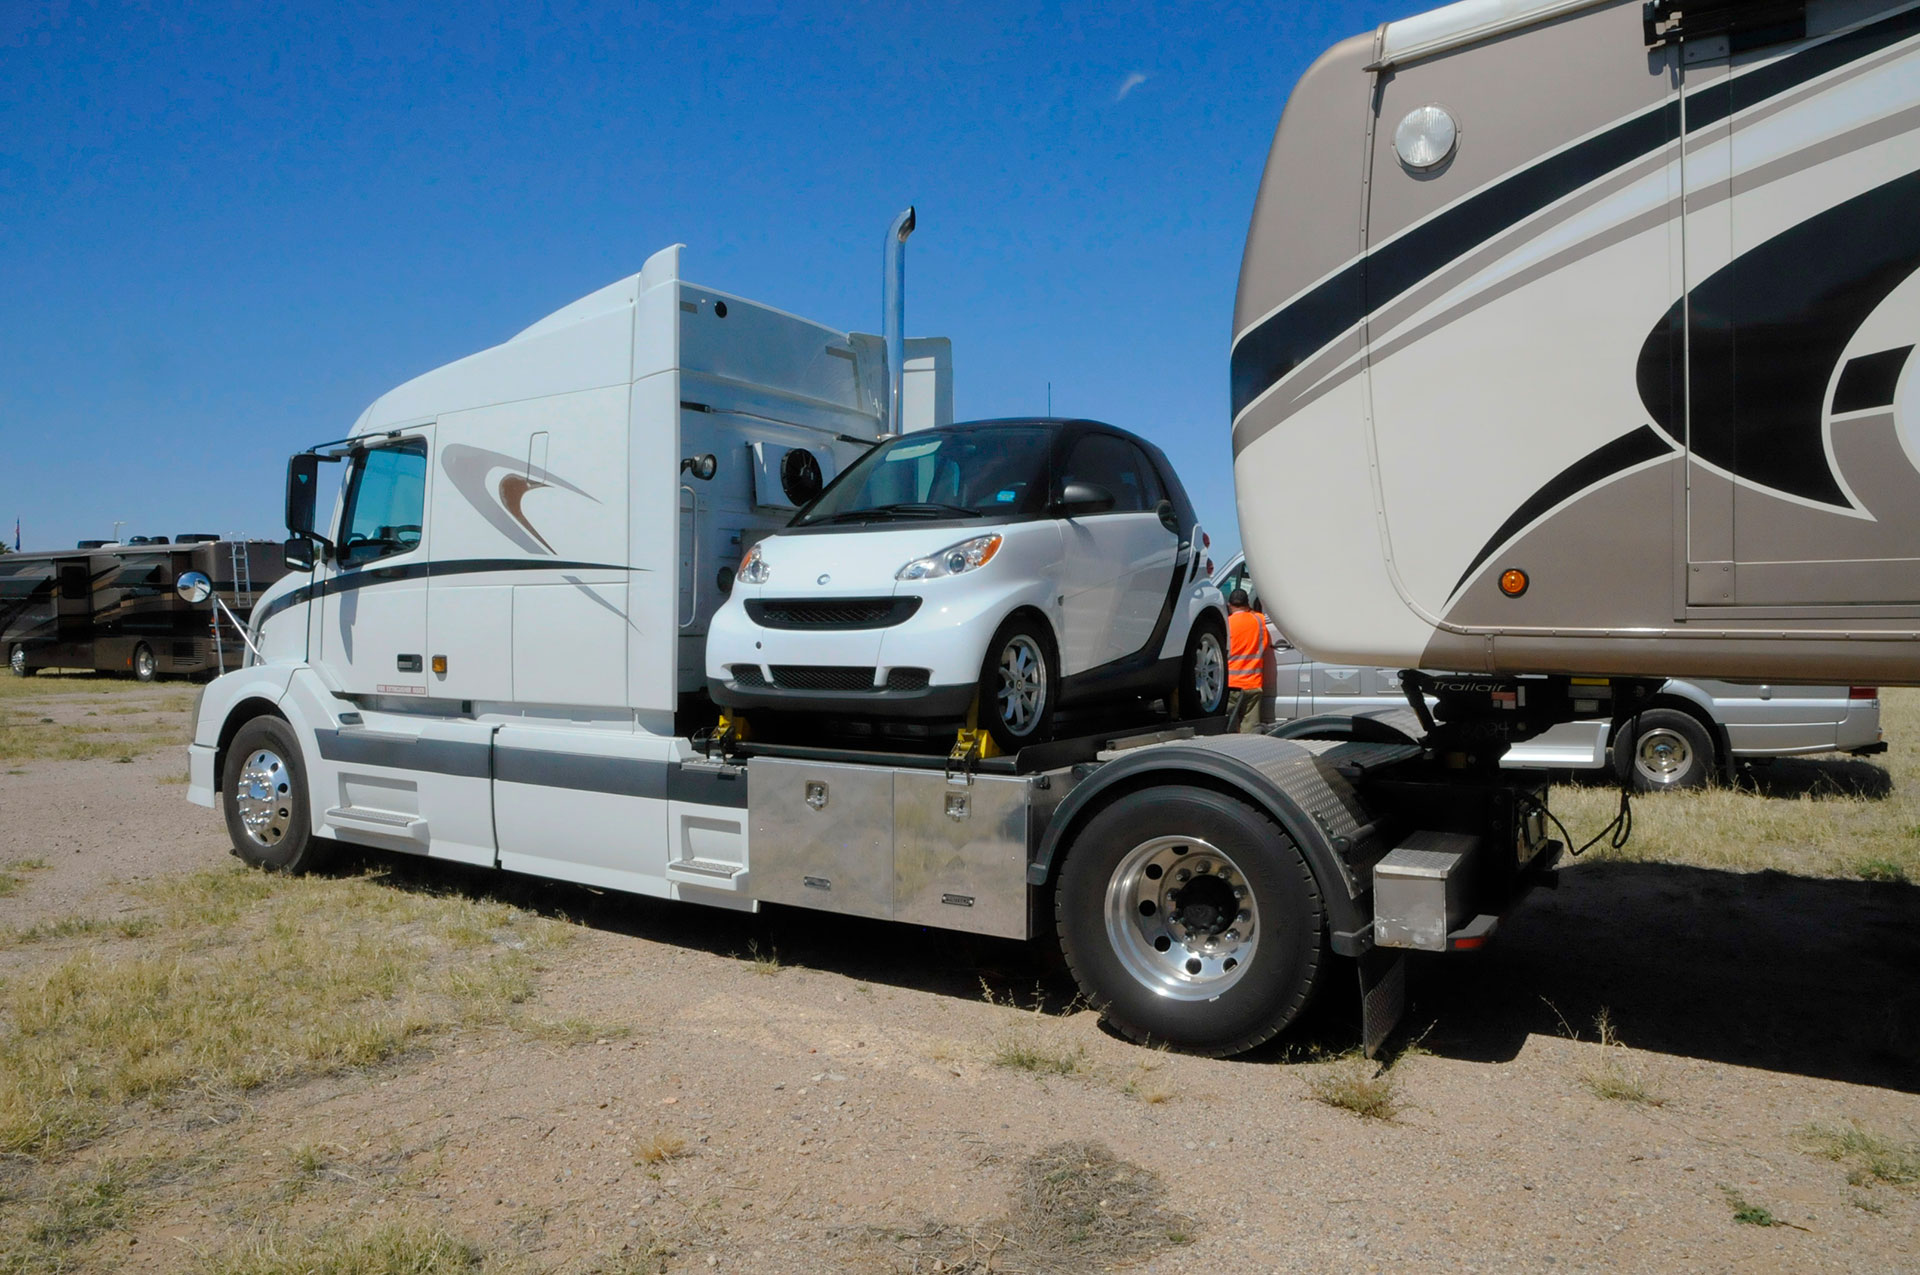 RV Getting Loaded For Towing